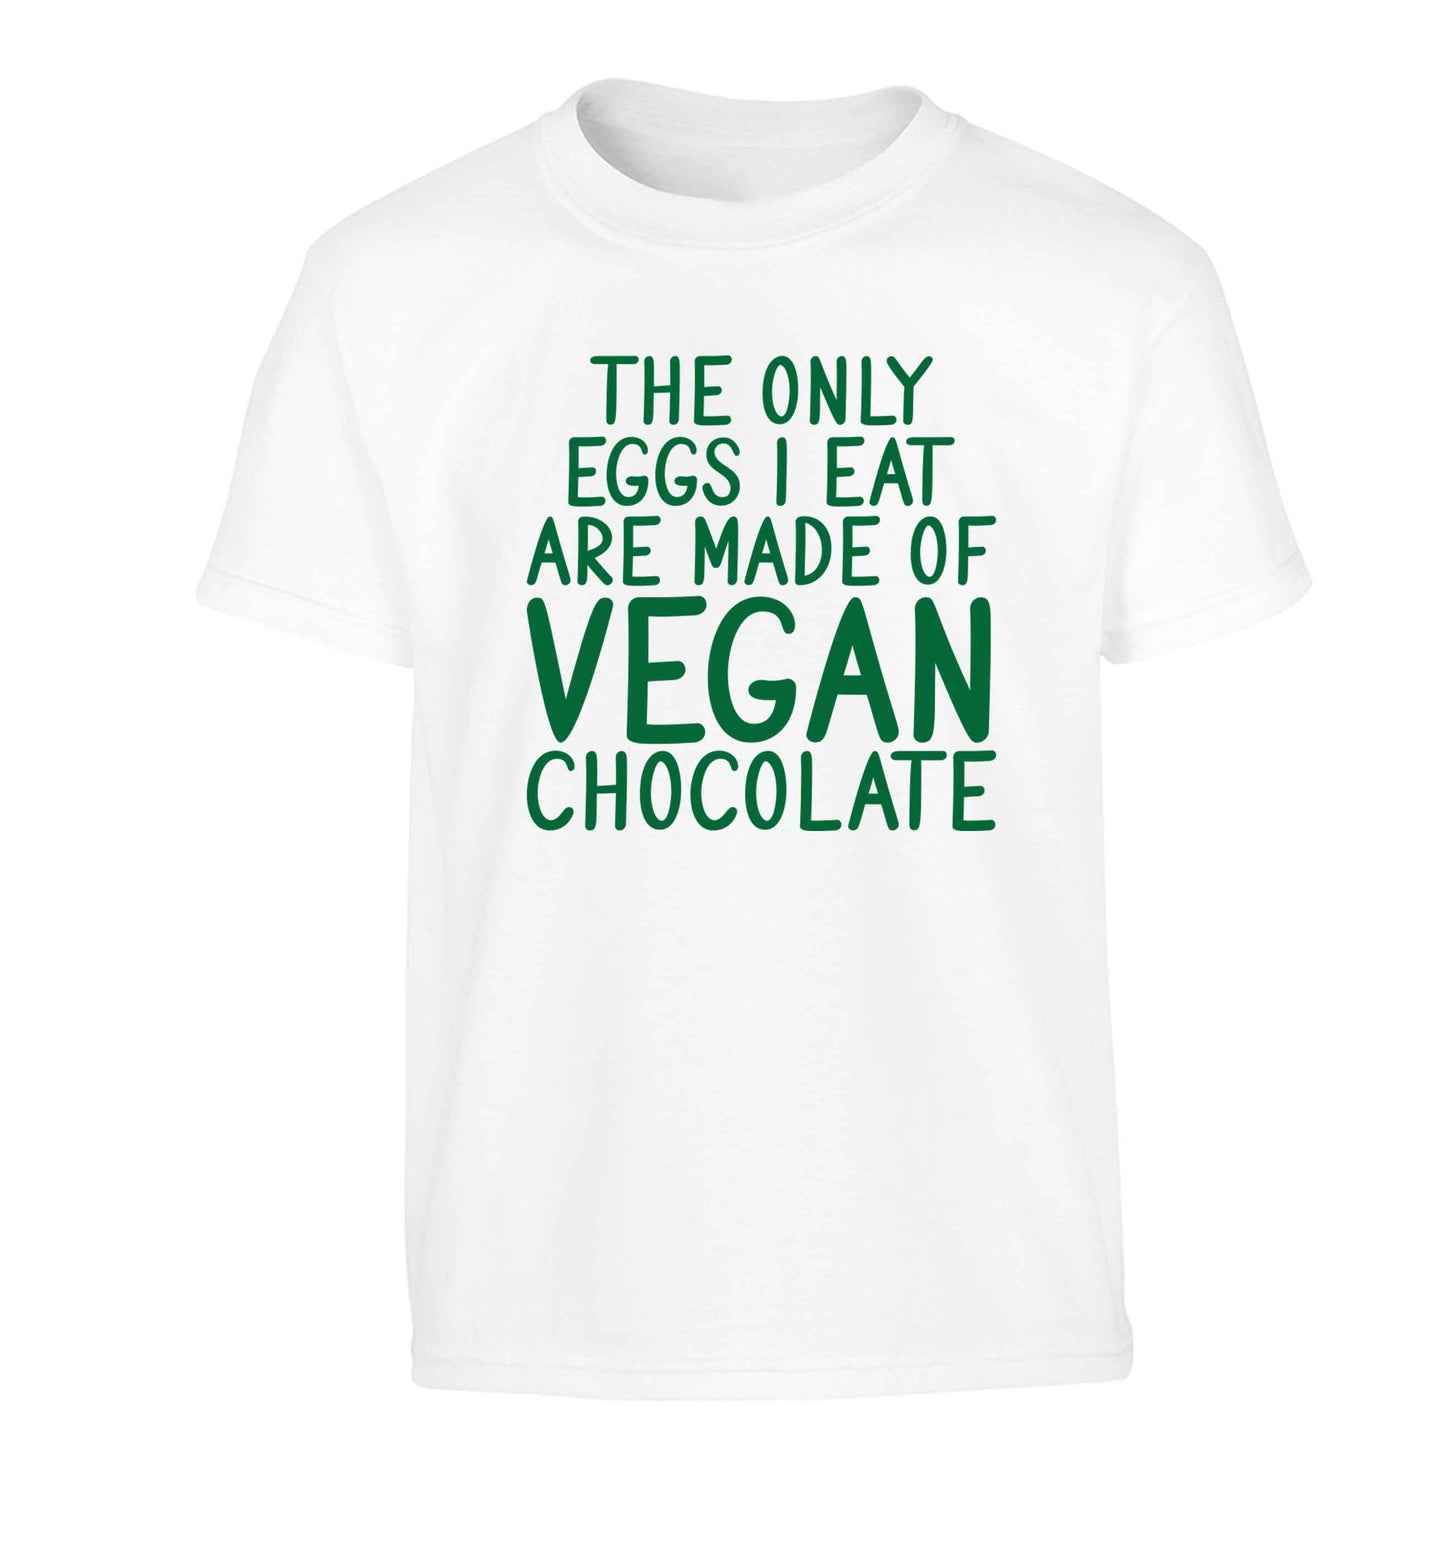 The only eggs I eat are made of vegan chocolate Children's white Tshirt 12-13 Years